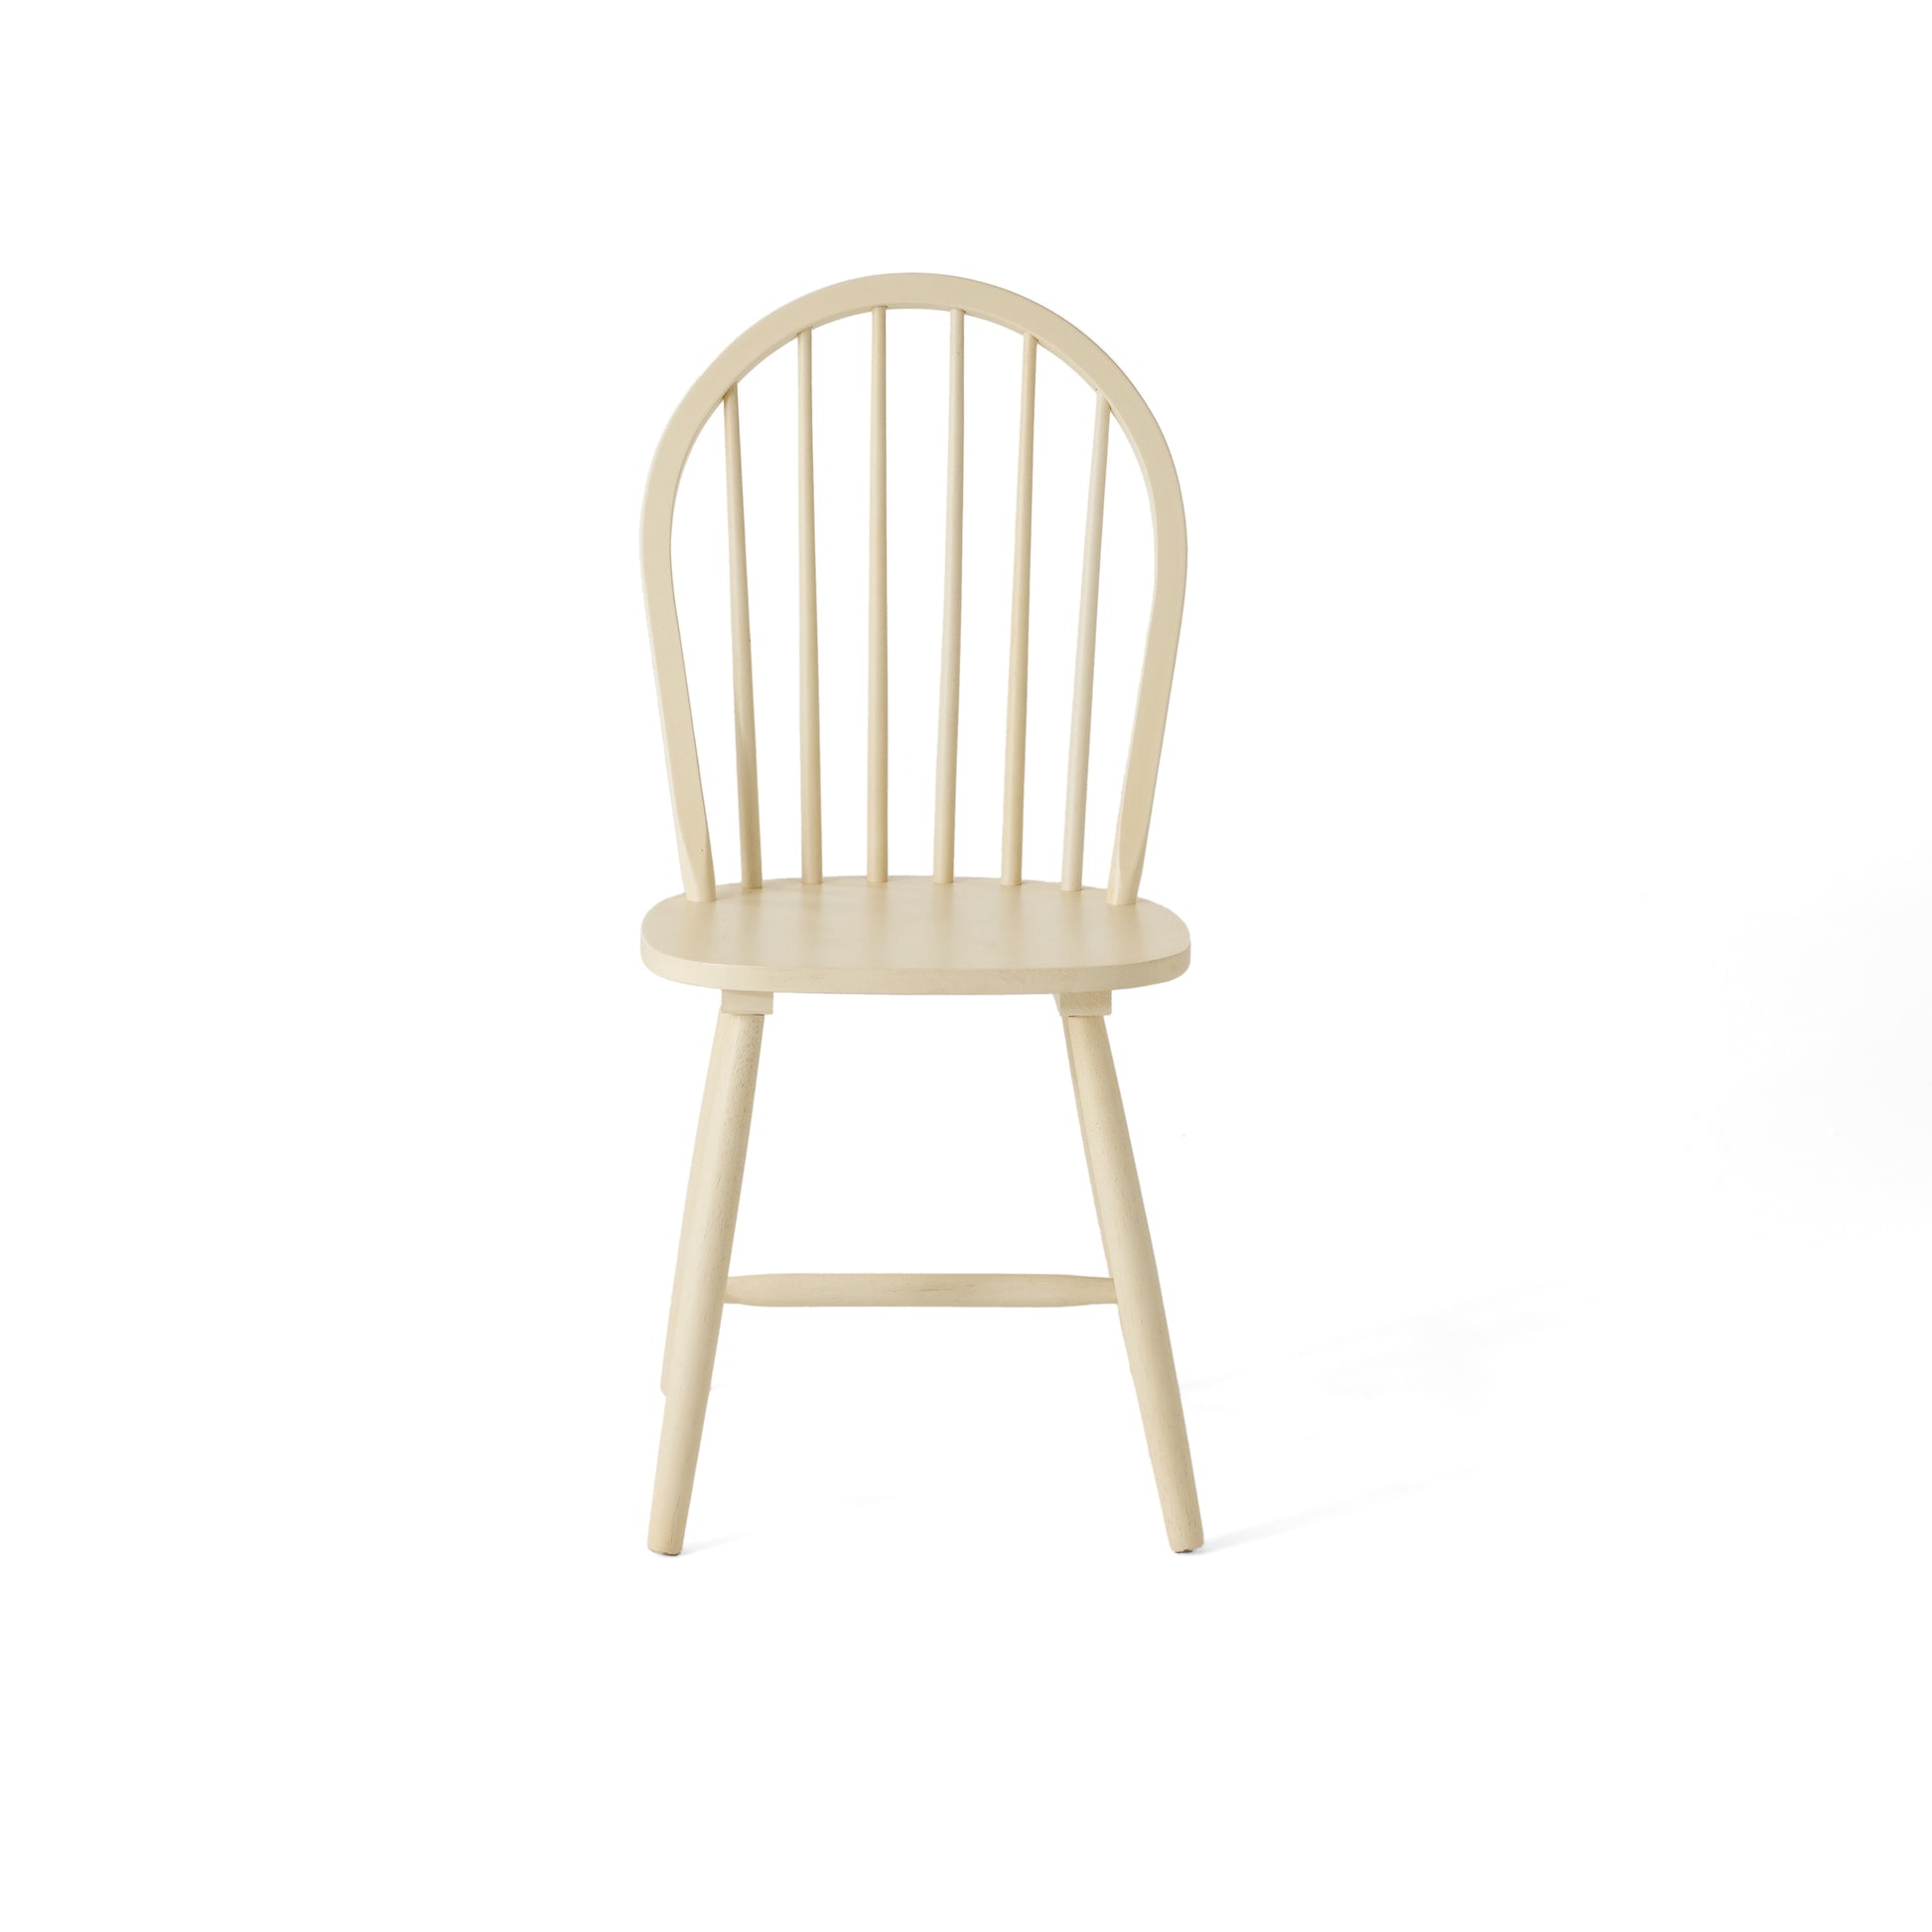 36 INCH H SPINDLE BACK W.CHAIR cream-rubber